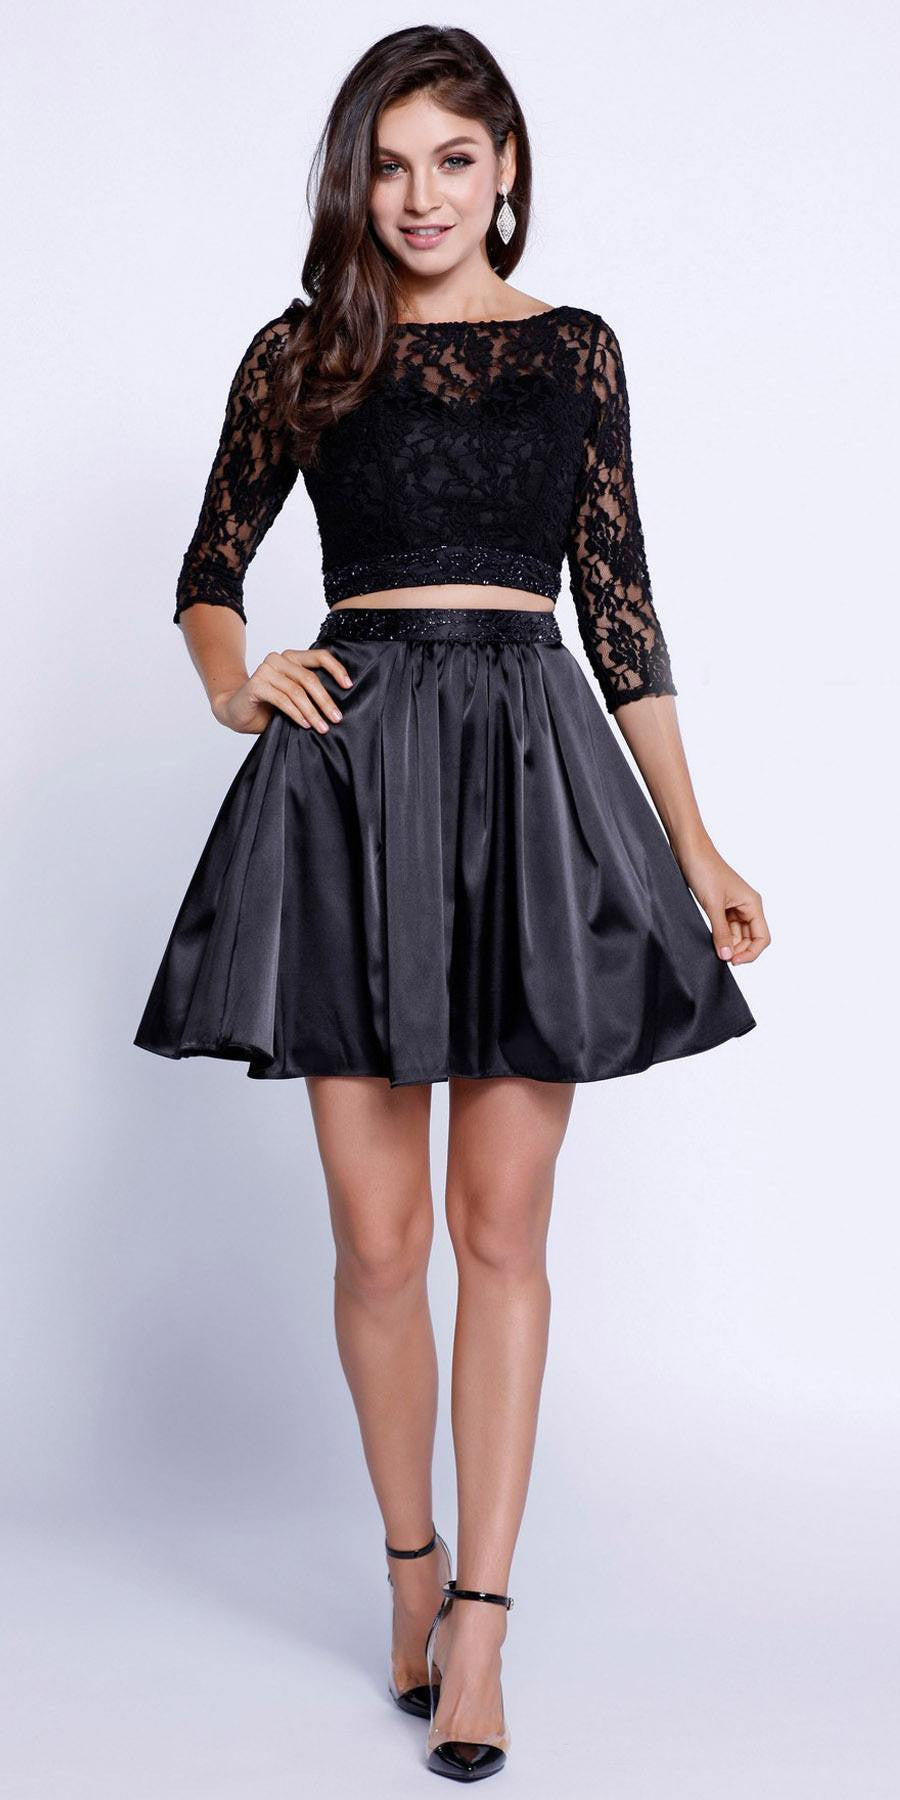 Quarter Sleeves Lace Top Short TwoPiece Prom Dress Black